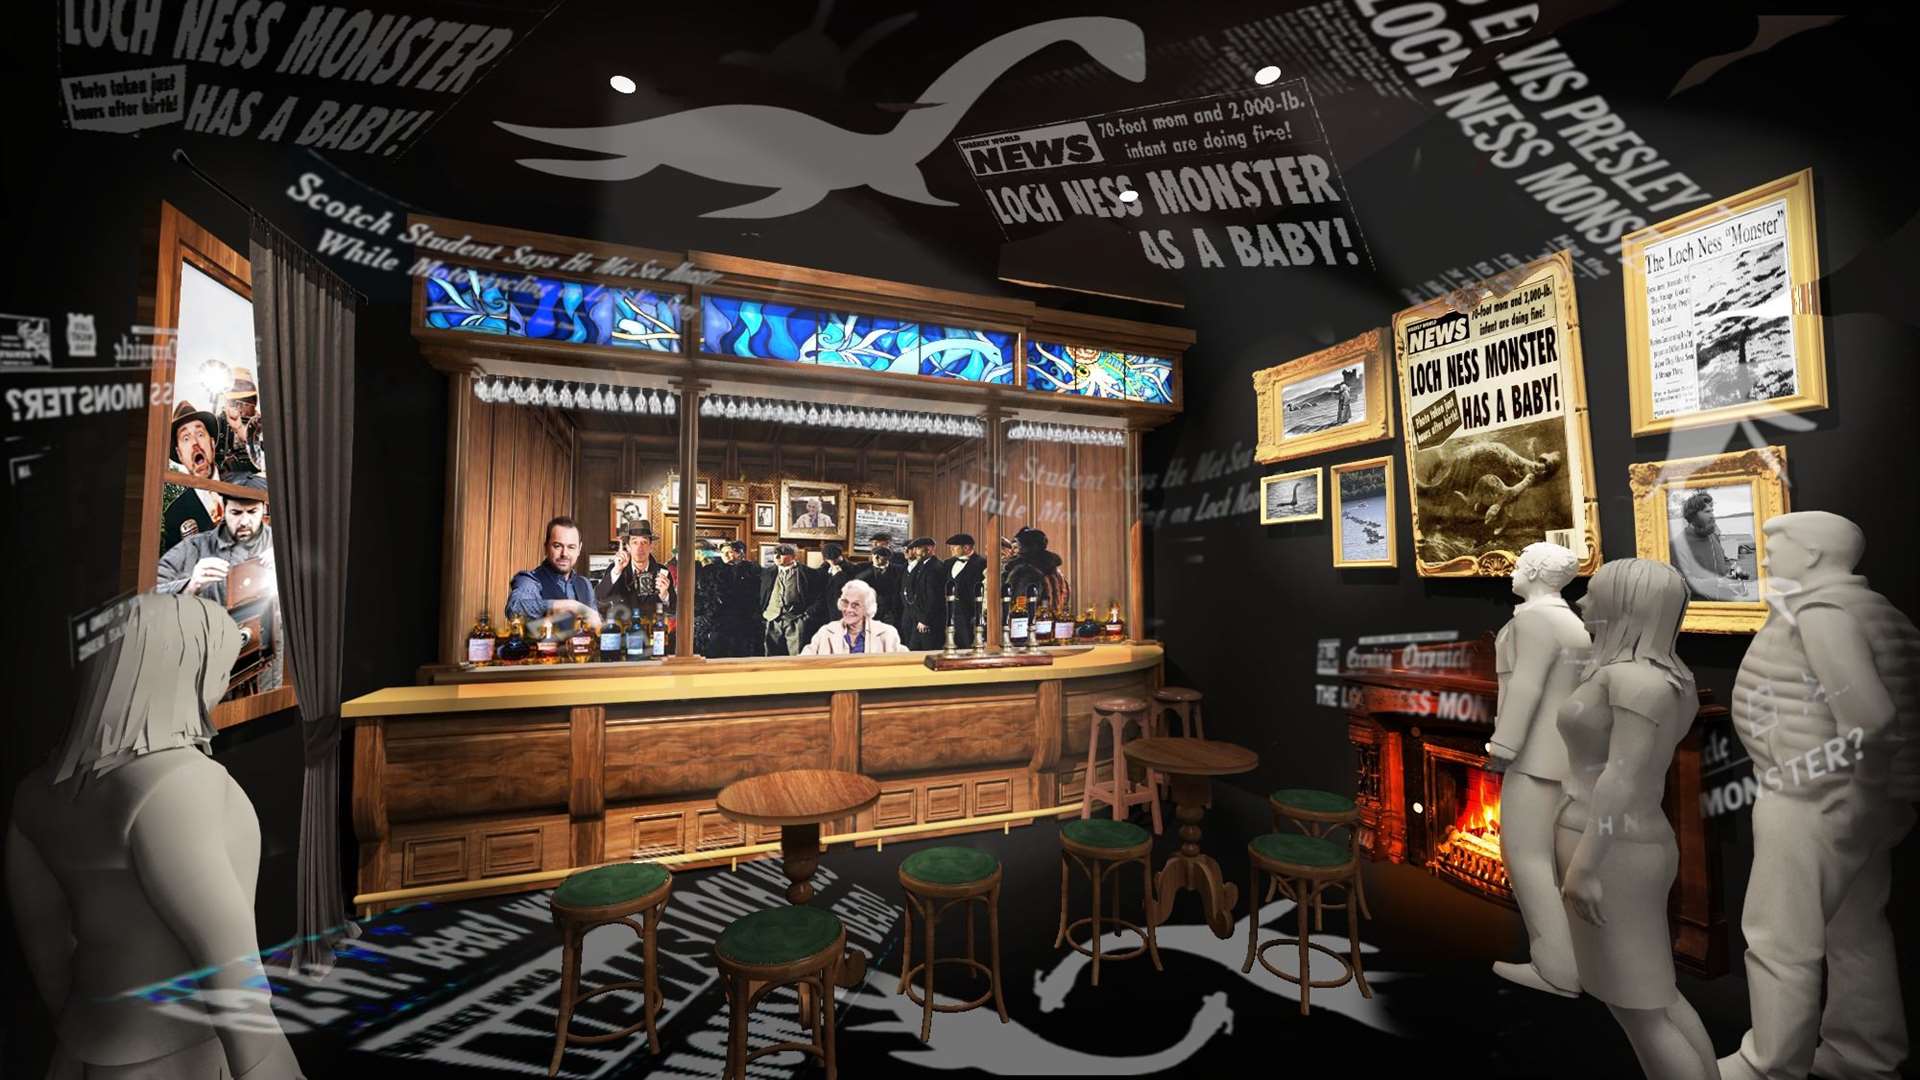 The £1.5 million revamp at the Loch Ness Centre includes the creation of a 1930s-style bar where the first "monster" sighting will be recalled in film.